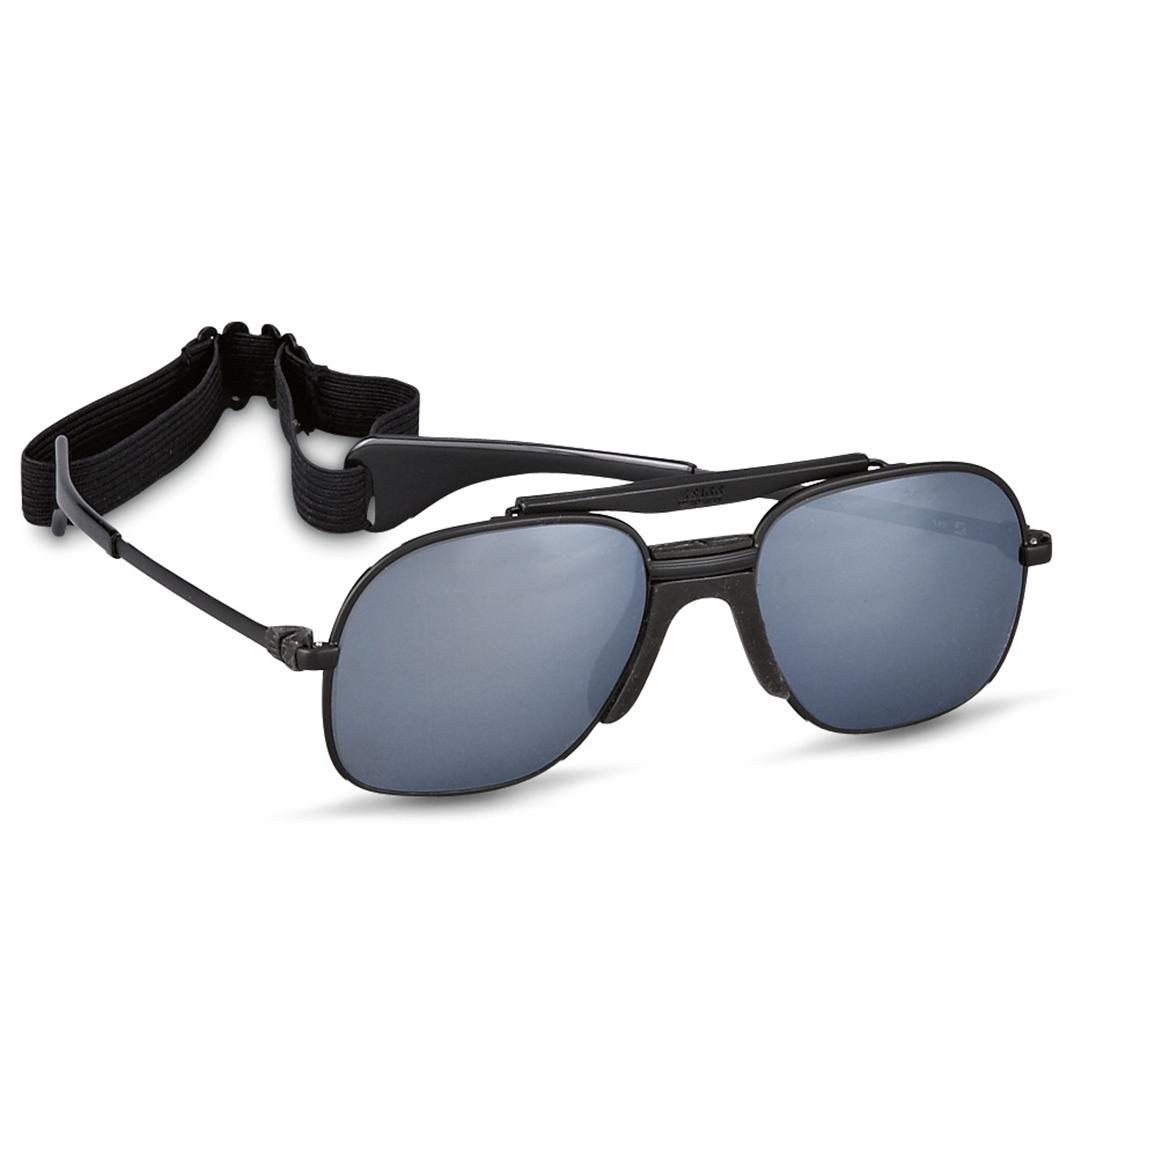 Zeiss® Aviator Sunglasses 133805 Goggles And Eyewear At Sportsman S Guide